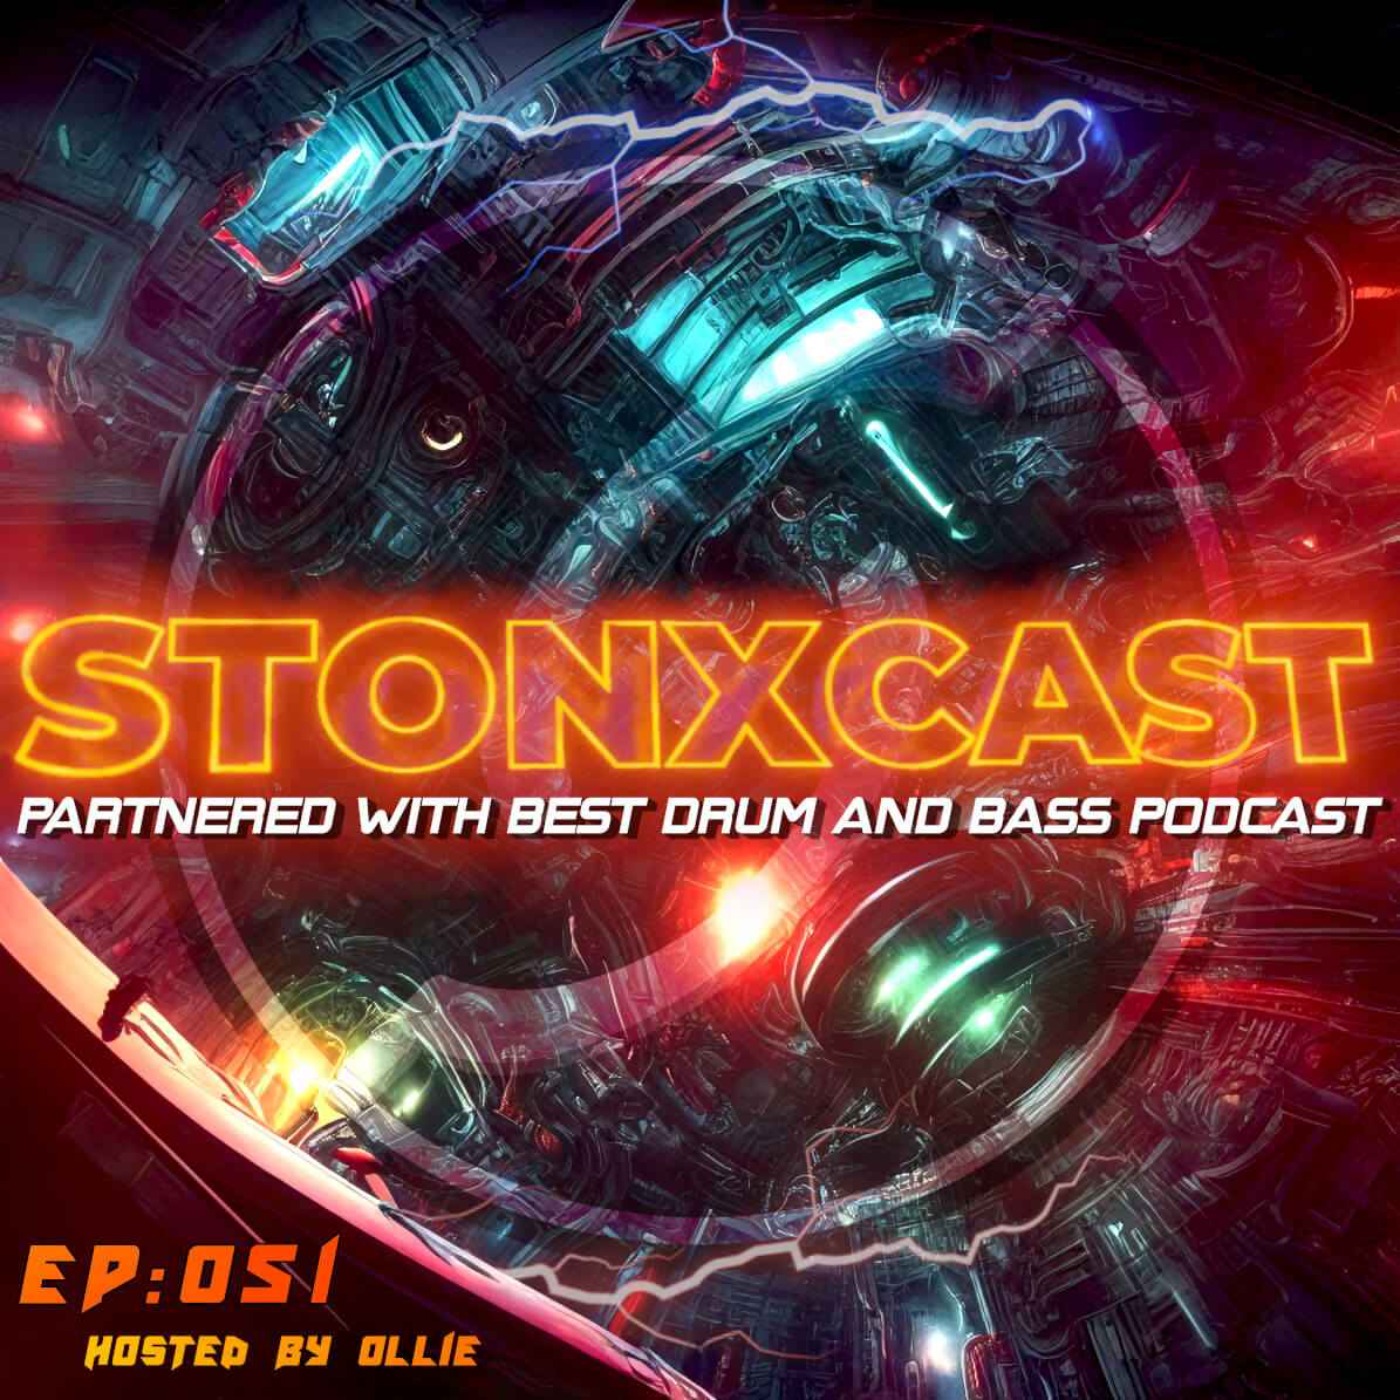 Stonxcast EP:051 - Hosted by Ollie Artwork